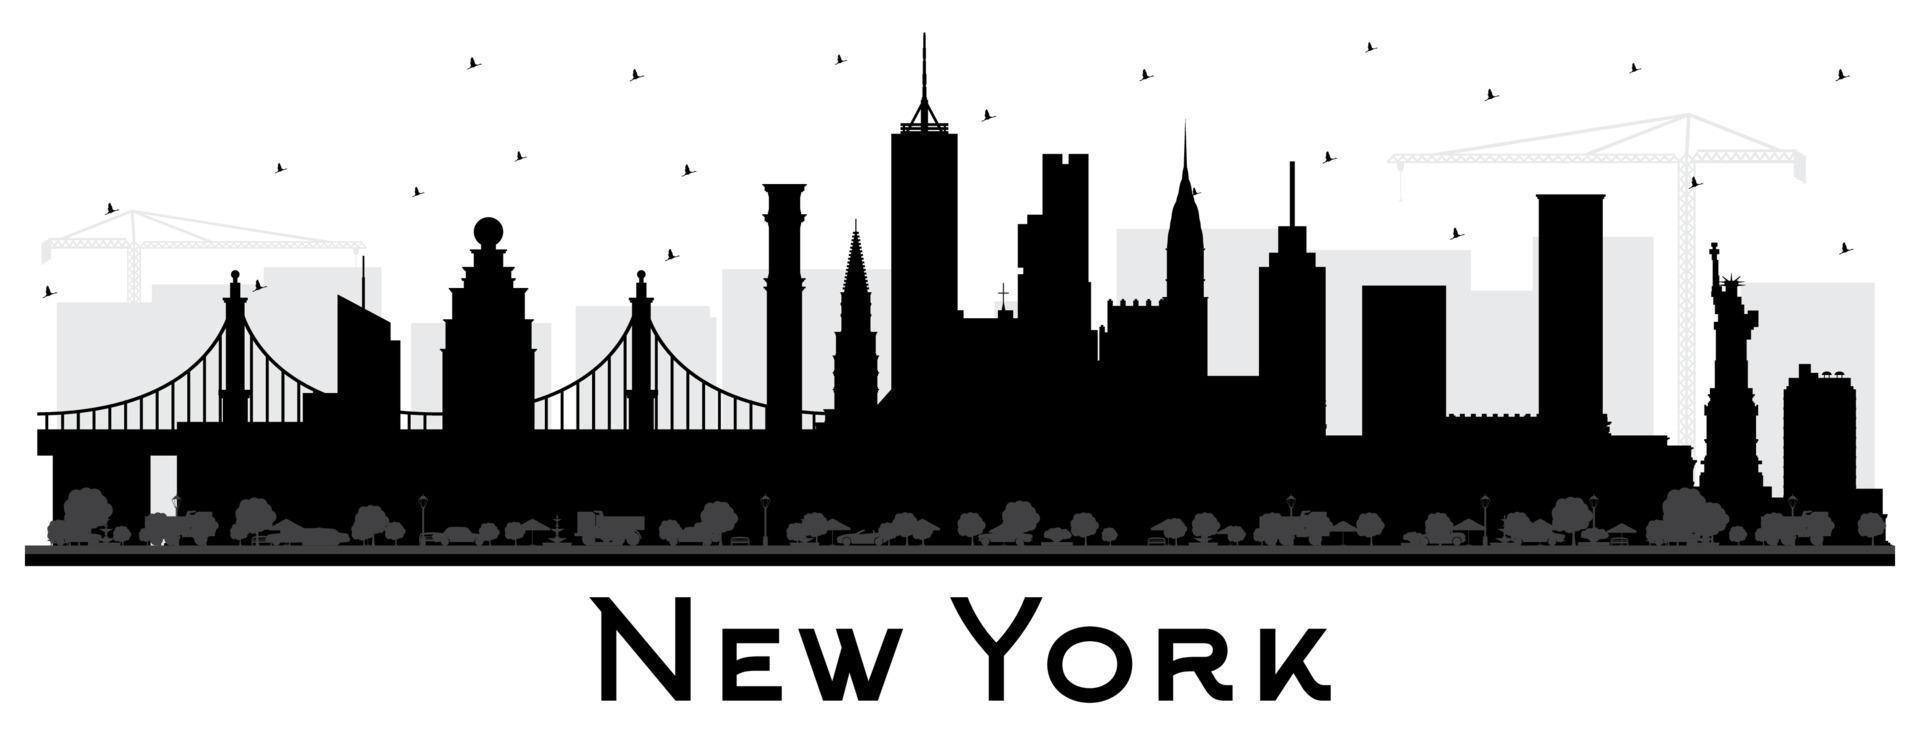 New York USA City Skyline Silhouette with Black Buildings Isolated on White. vector